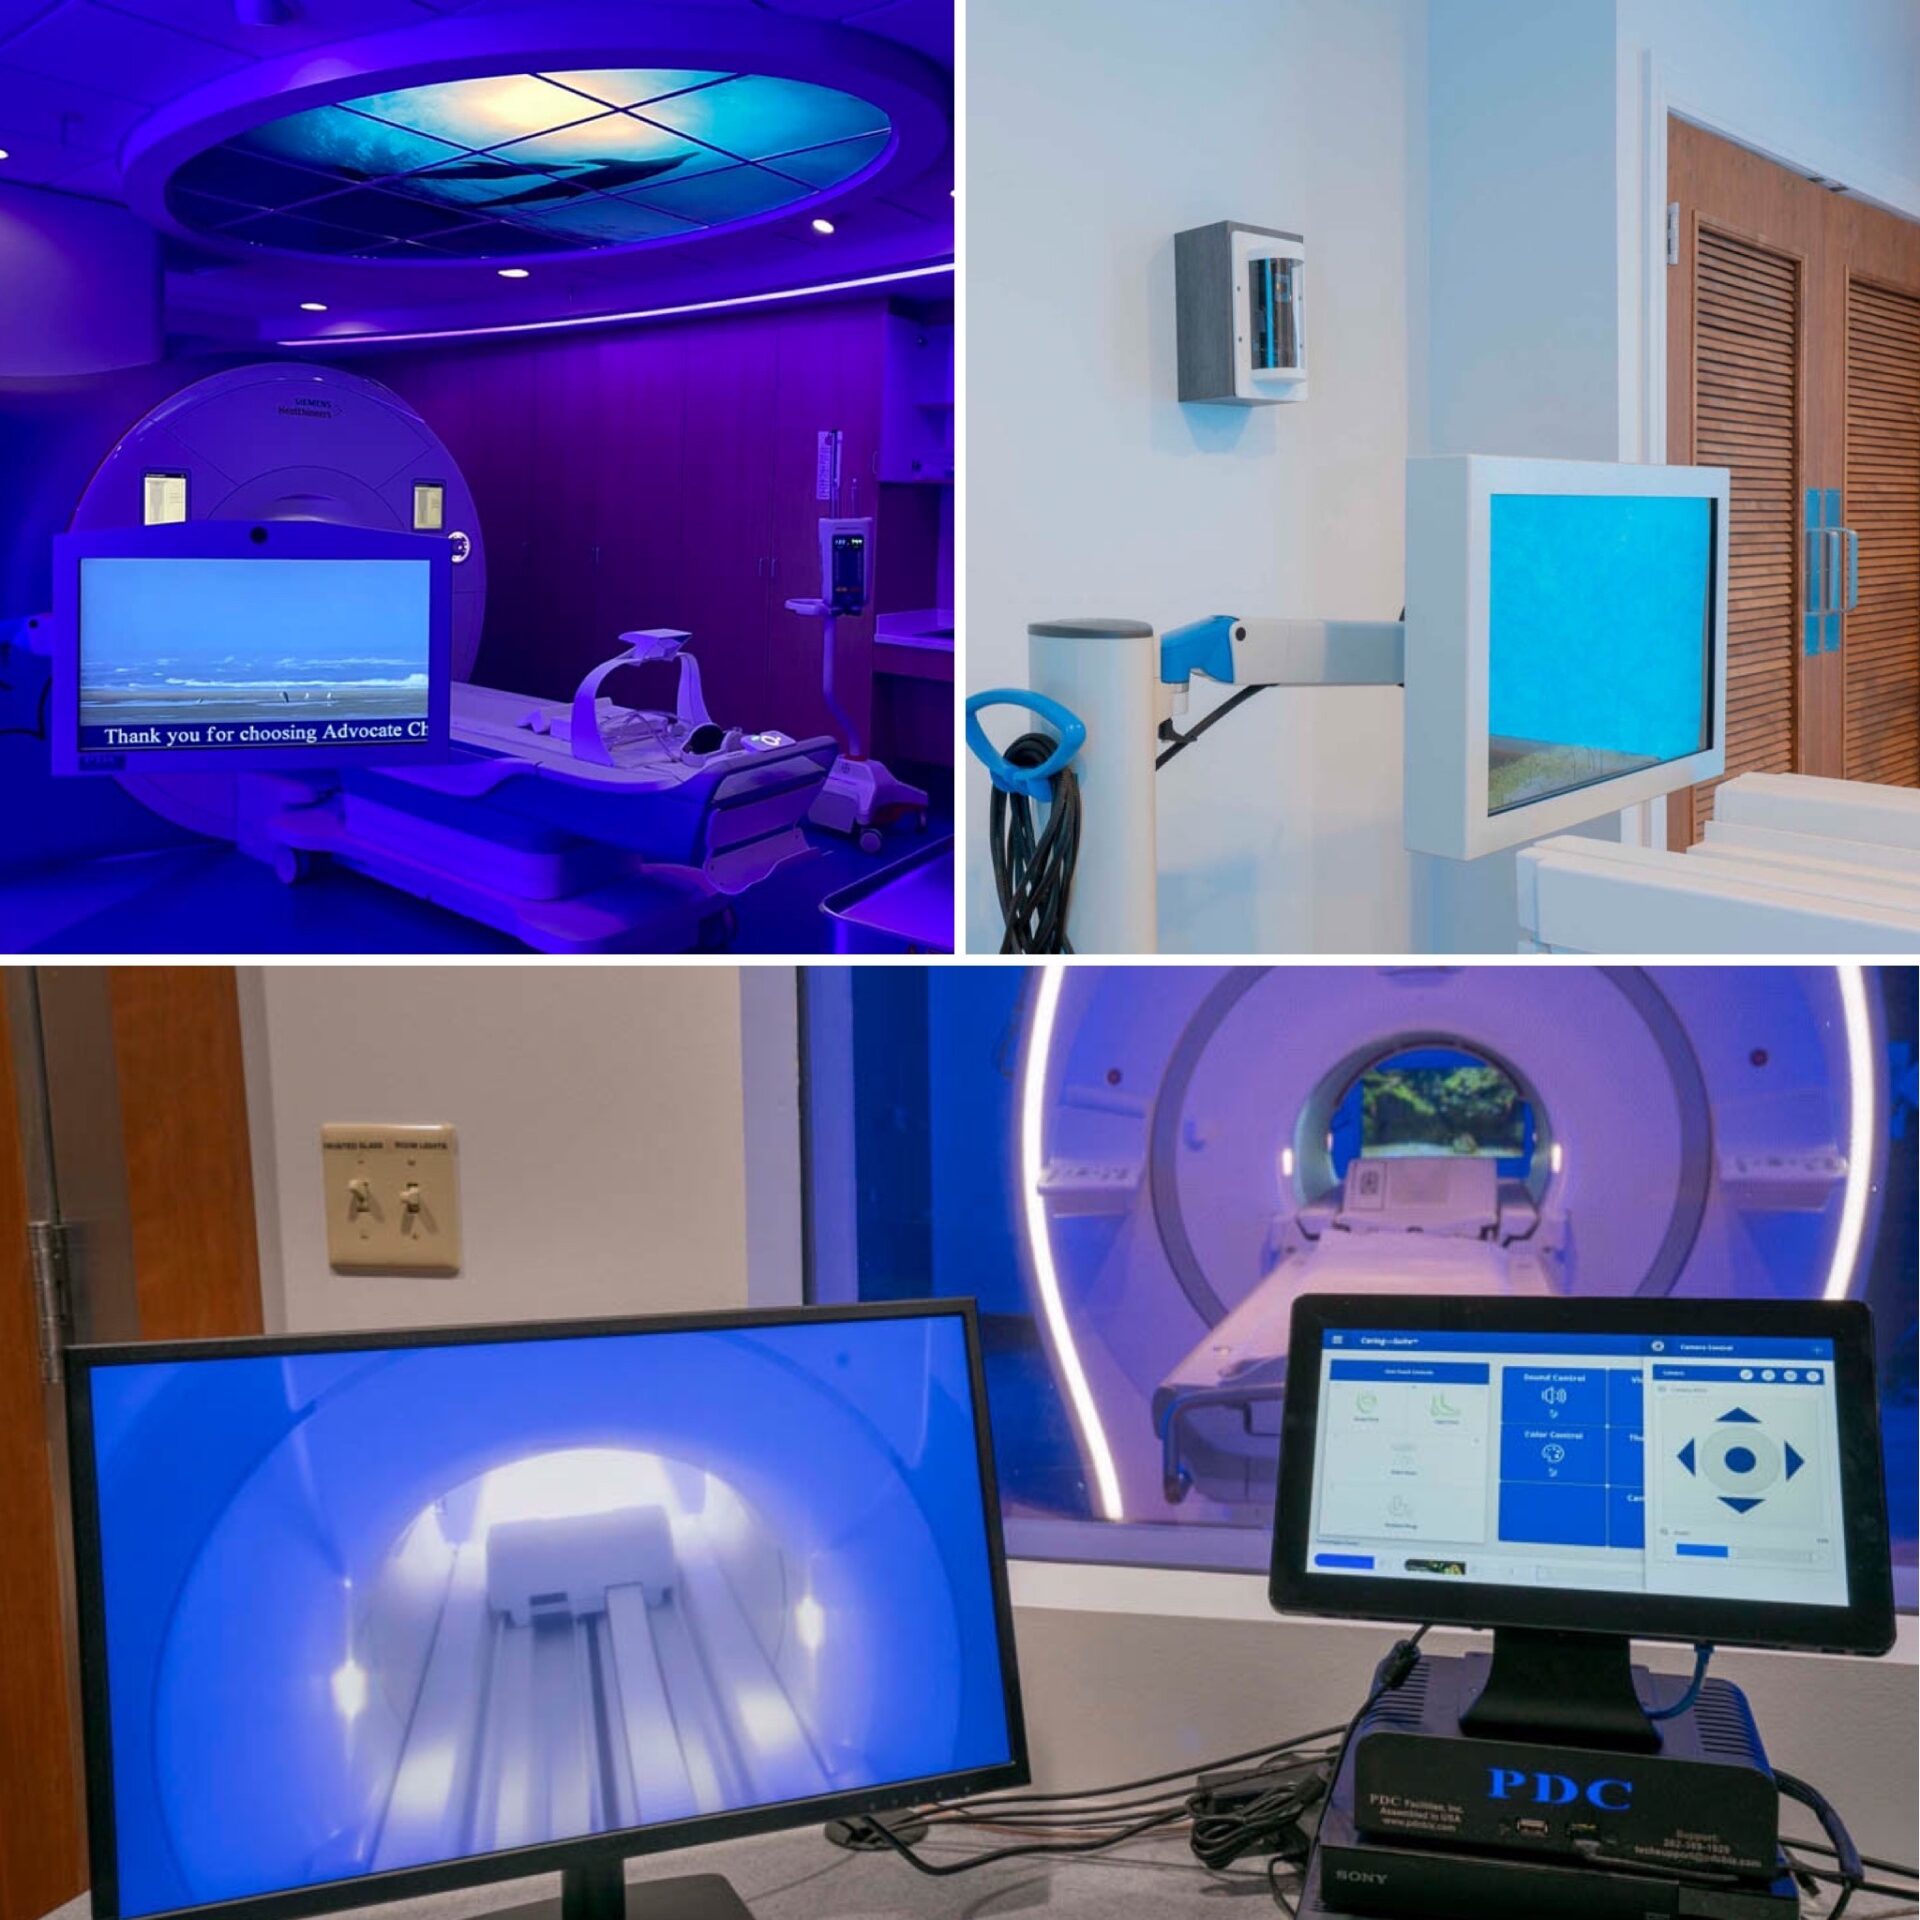 PDC MRI Pan-Tilt-Zoom (PTZ) Camera and In-Bore Viewing Video Display with integrated camera